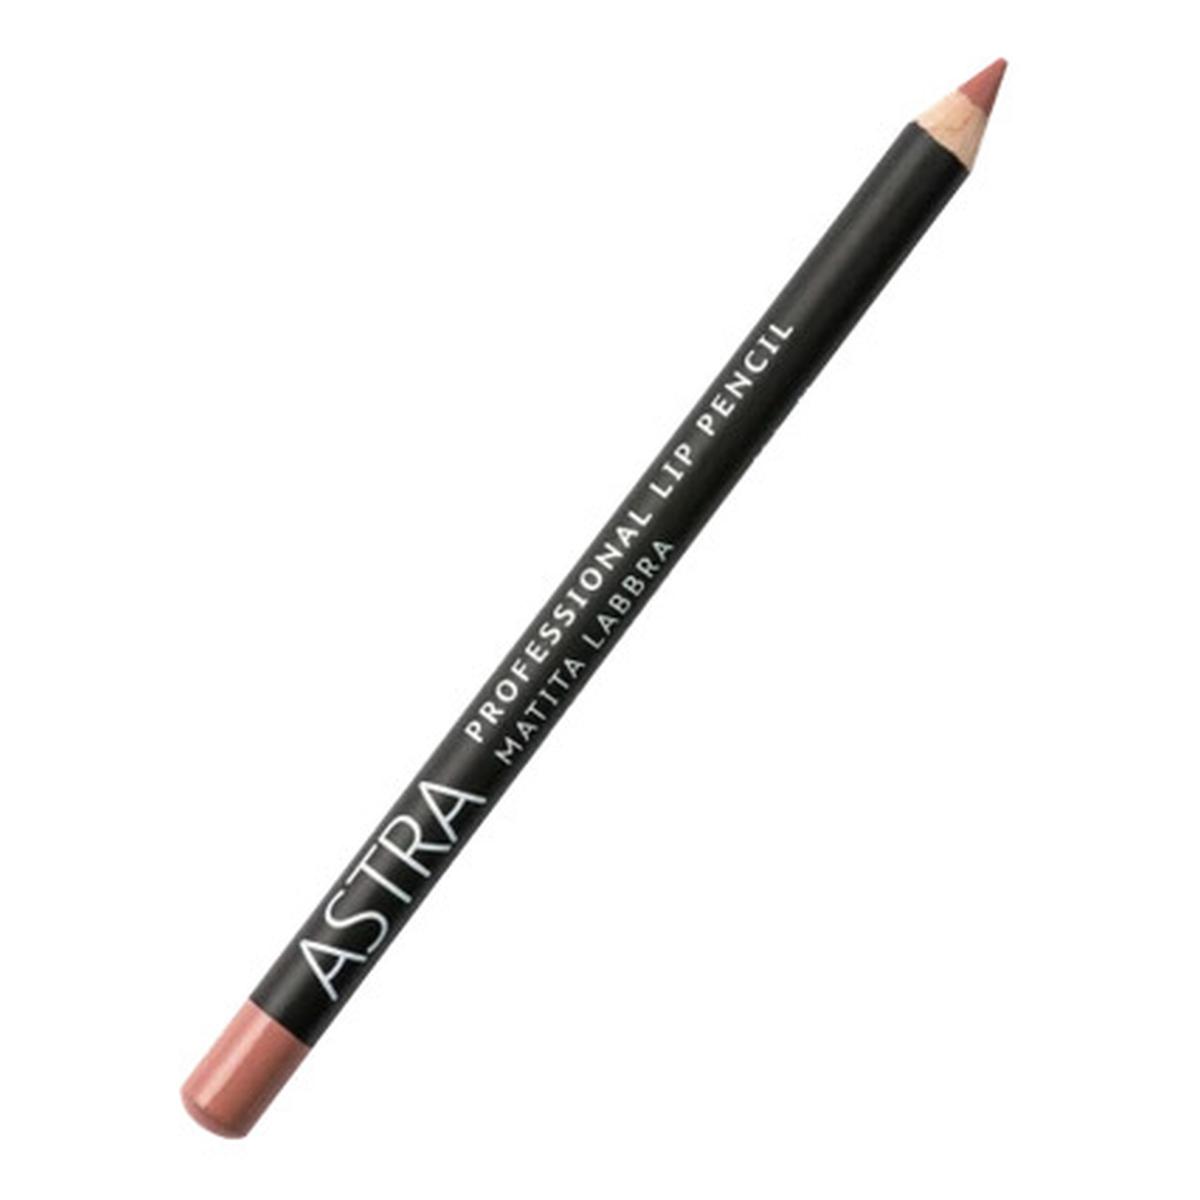 Professional Lip Pencil 32 Brown lips - Astra Make Up